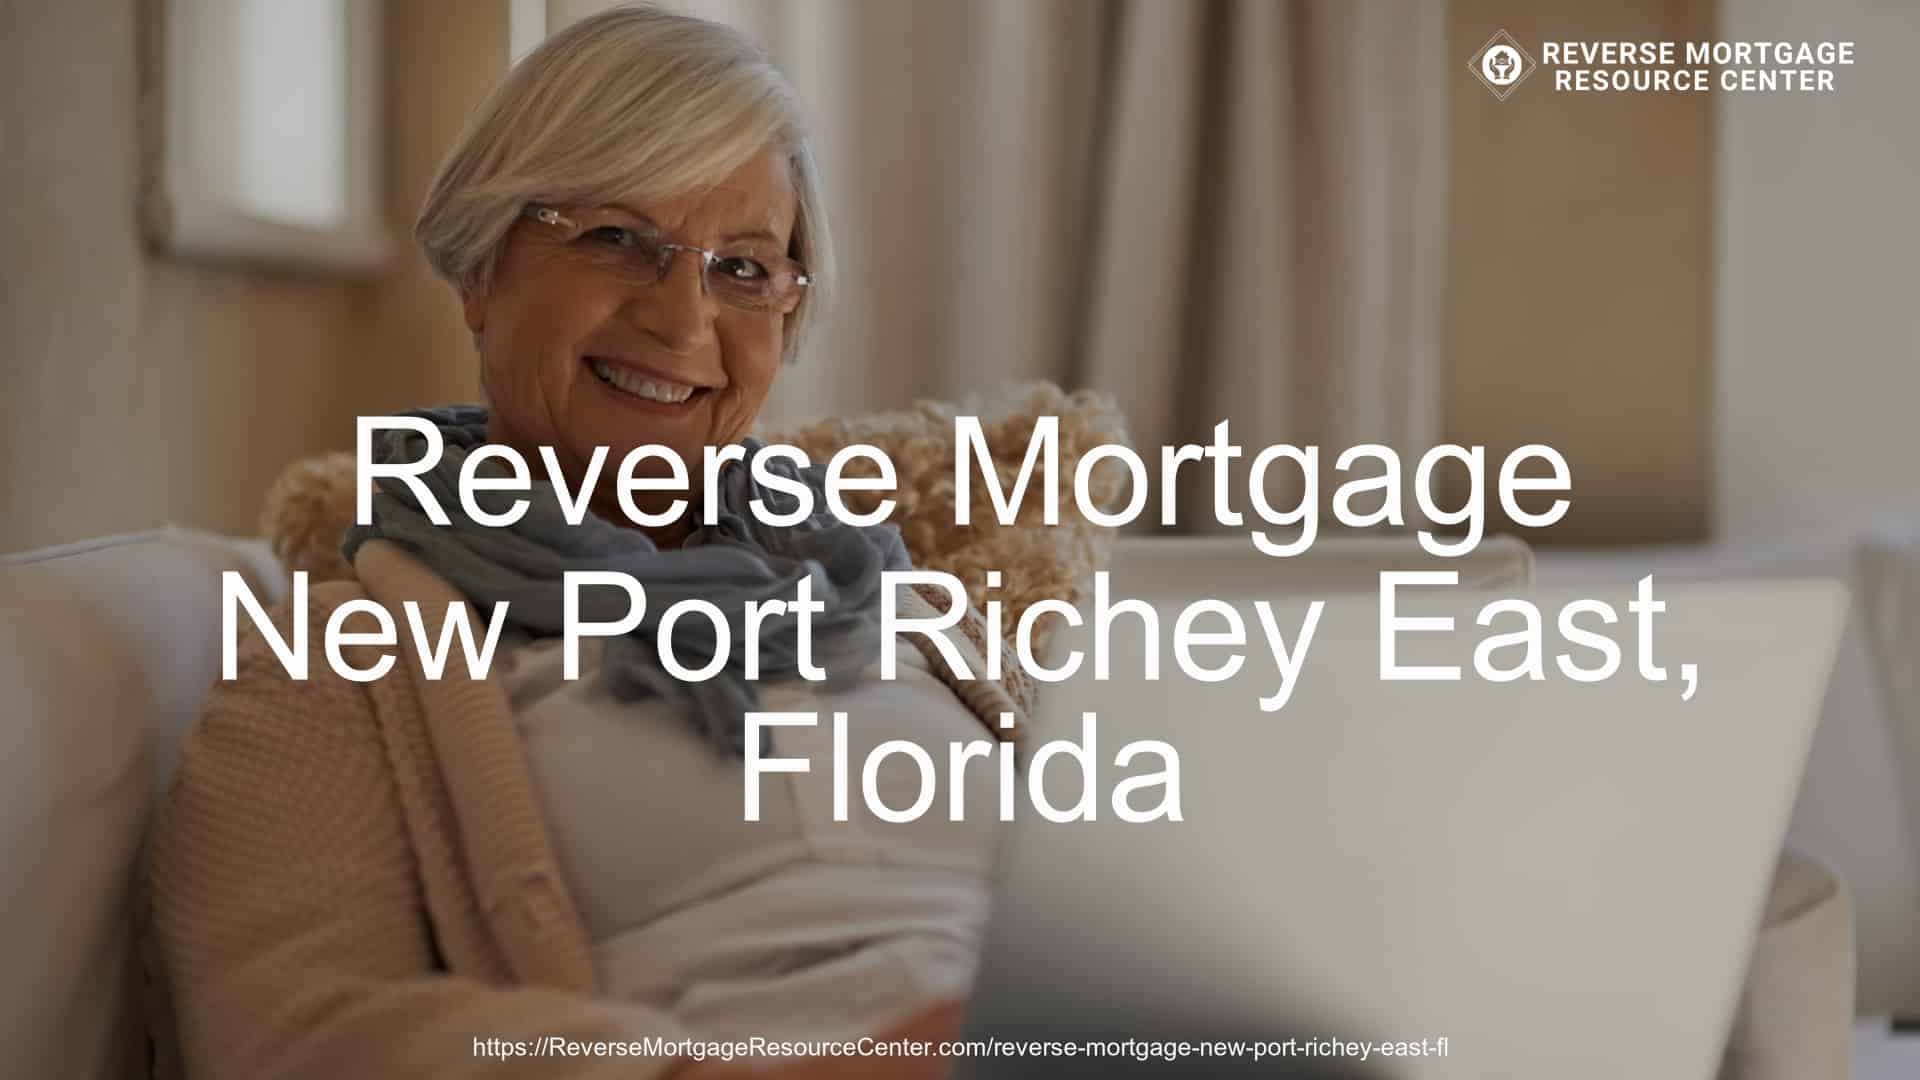 Reverse Mortgage Loans in New Port Richey East Florida